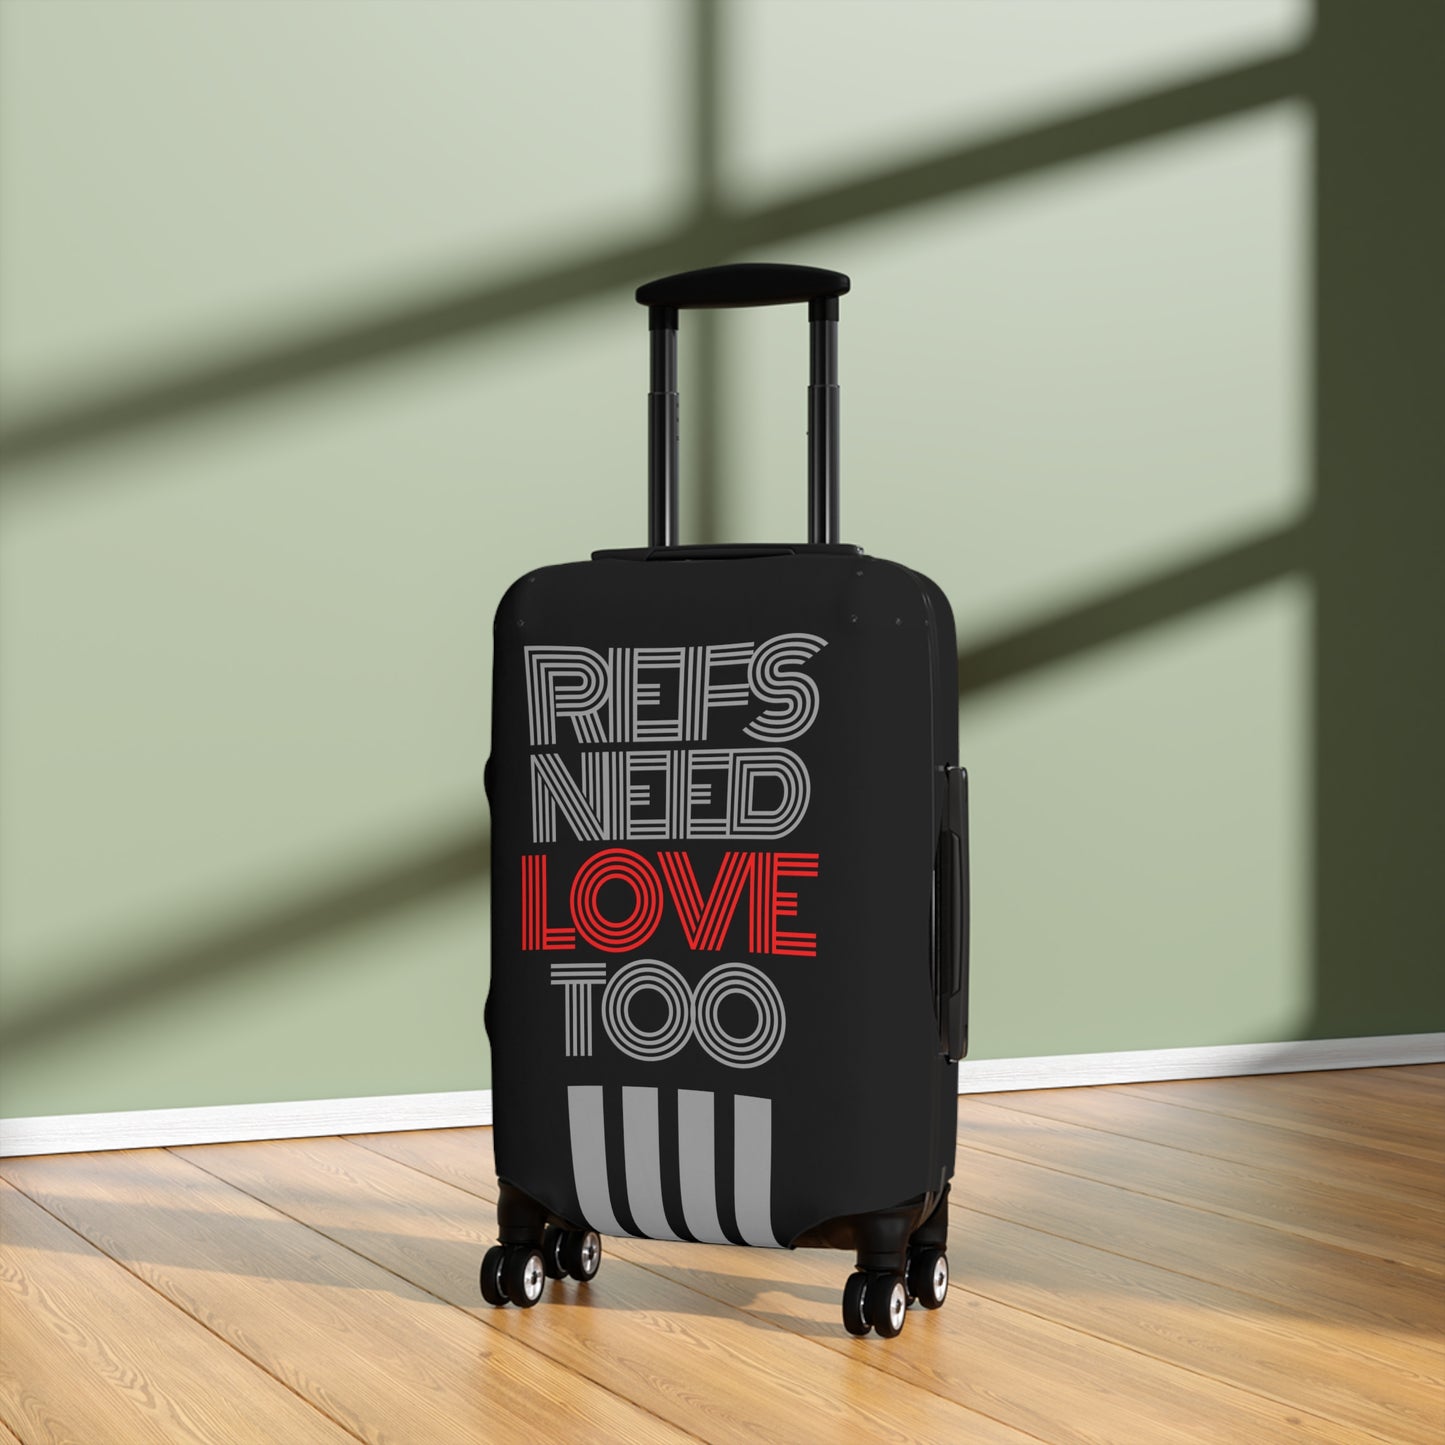 Refs Need Love Too Luggage Cover | Great gift for refs | Traveling Sports Officials | Referee accessories | Travel cover